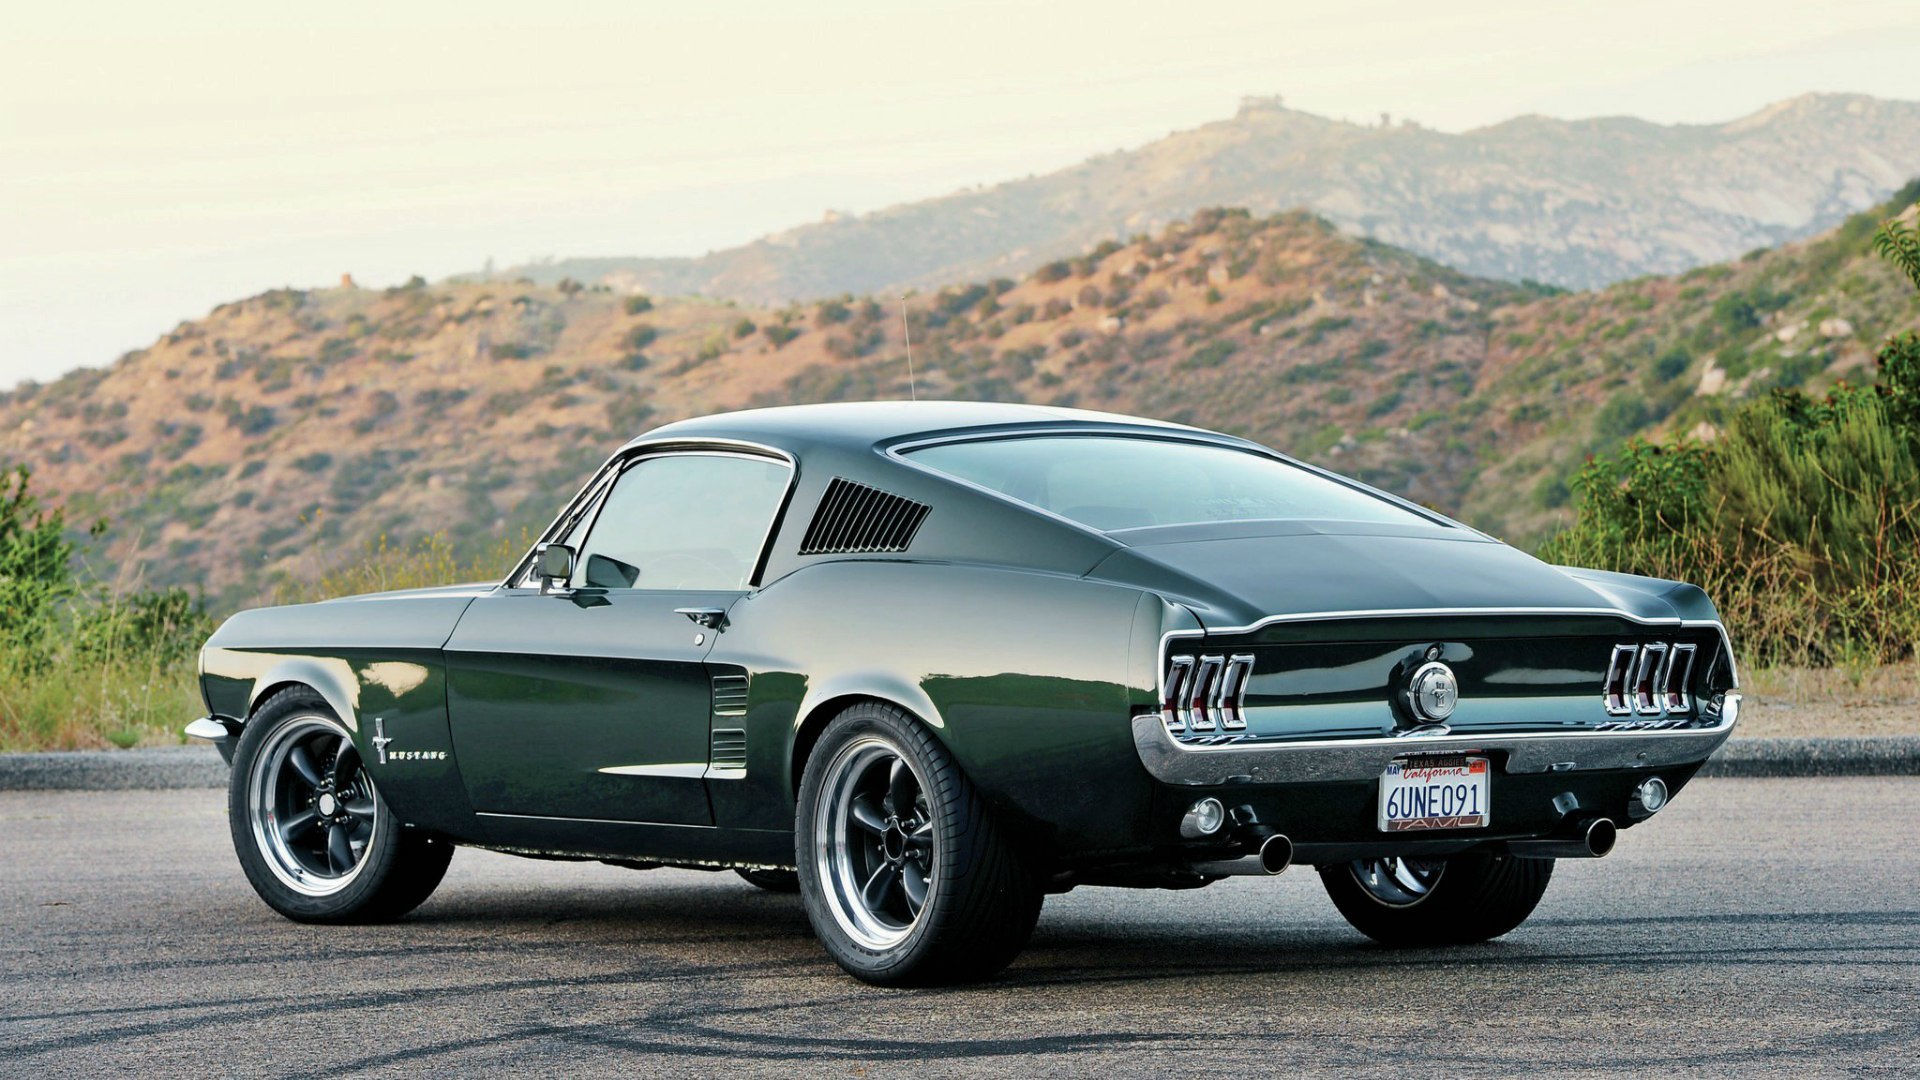 vehicles, ford mustang fastback, car, fastback, ford mustang, ford, green car, muscle car